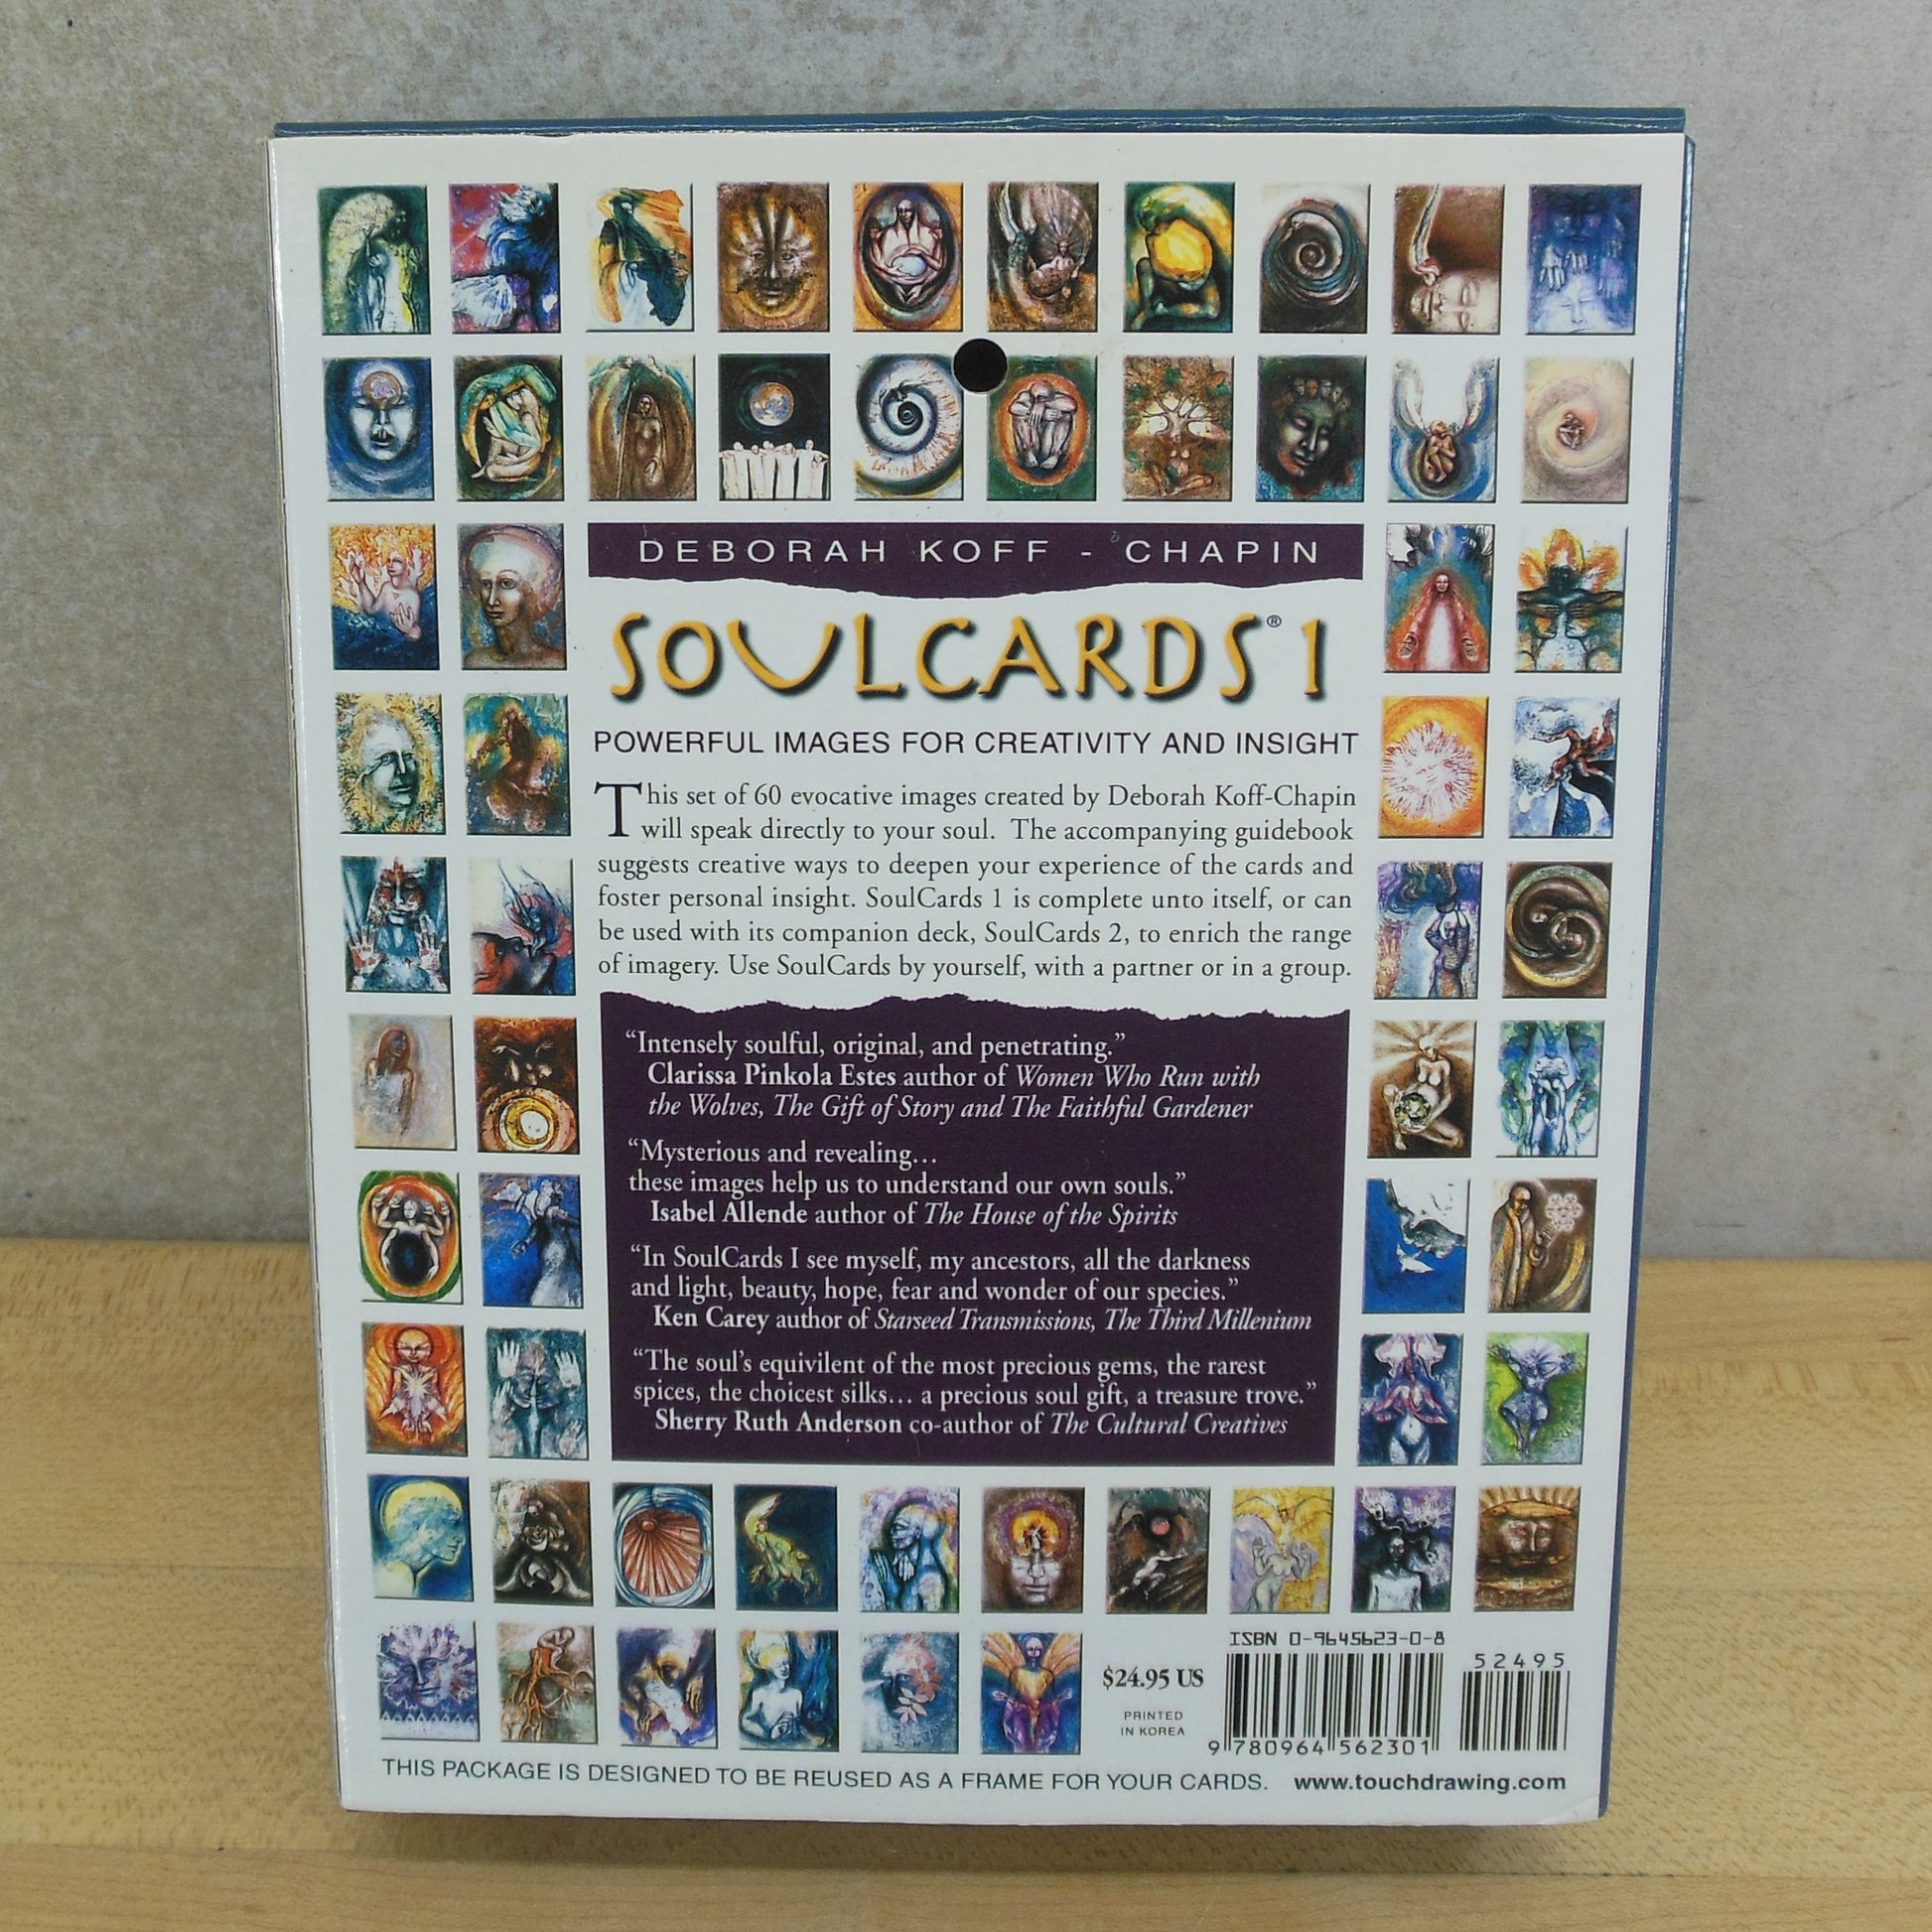 Soul Cards 1 Powerful Images for Creativity & Insight - Deborah Koff-Chapin Complete Set